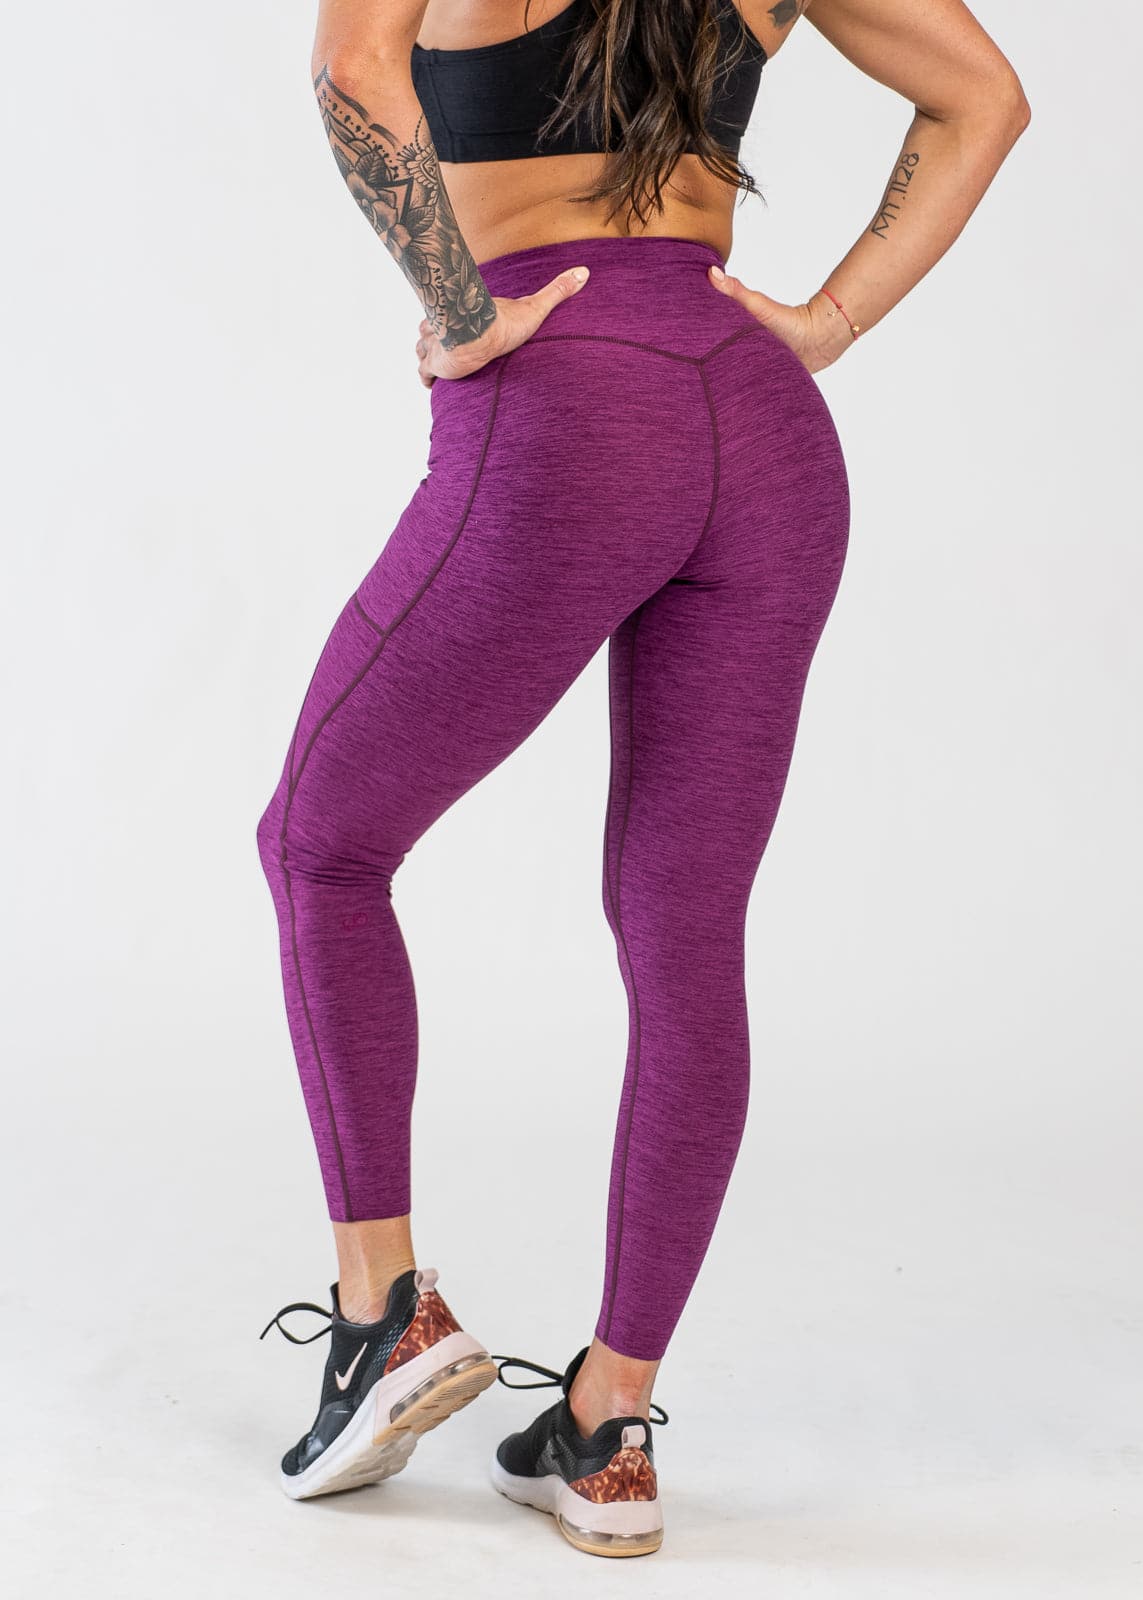 Chest Down 3/4 Back View With Hands on Hips Wearing Dream Leggings With Pockets | Raspberry